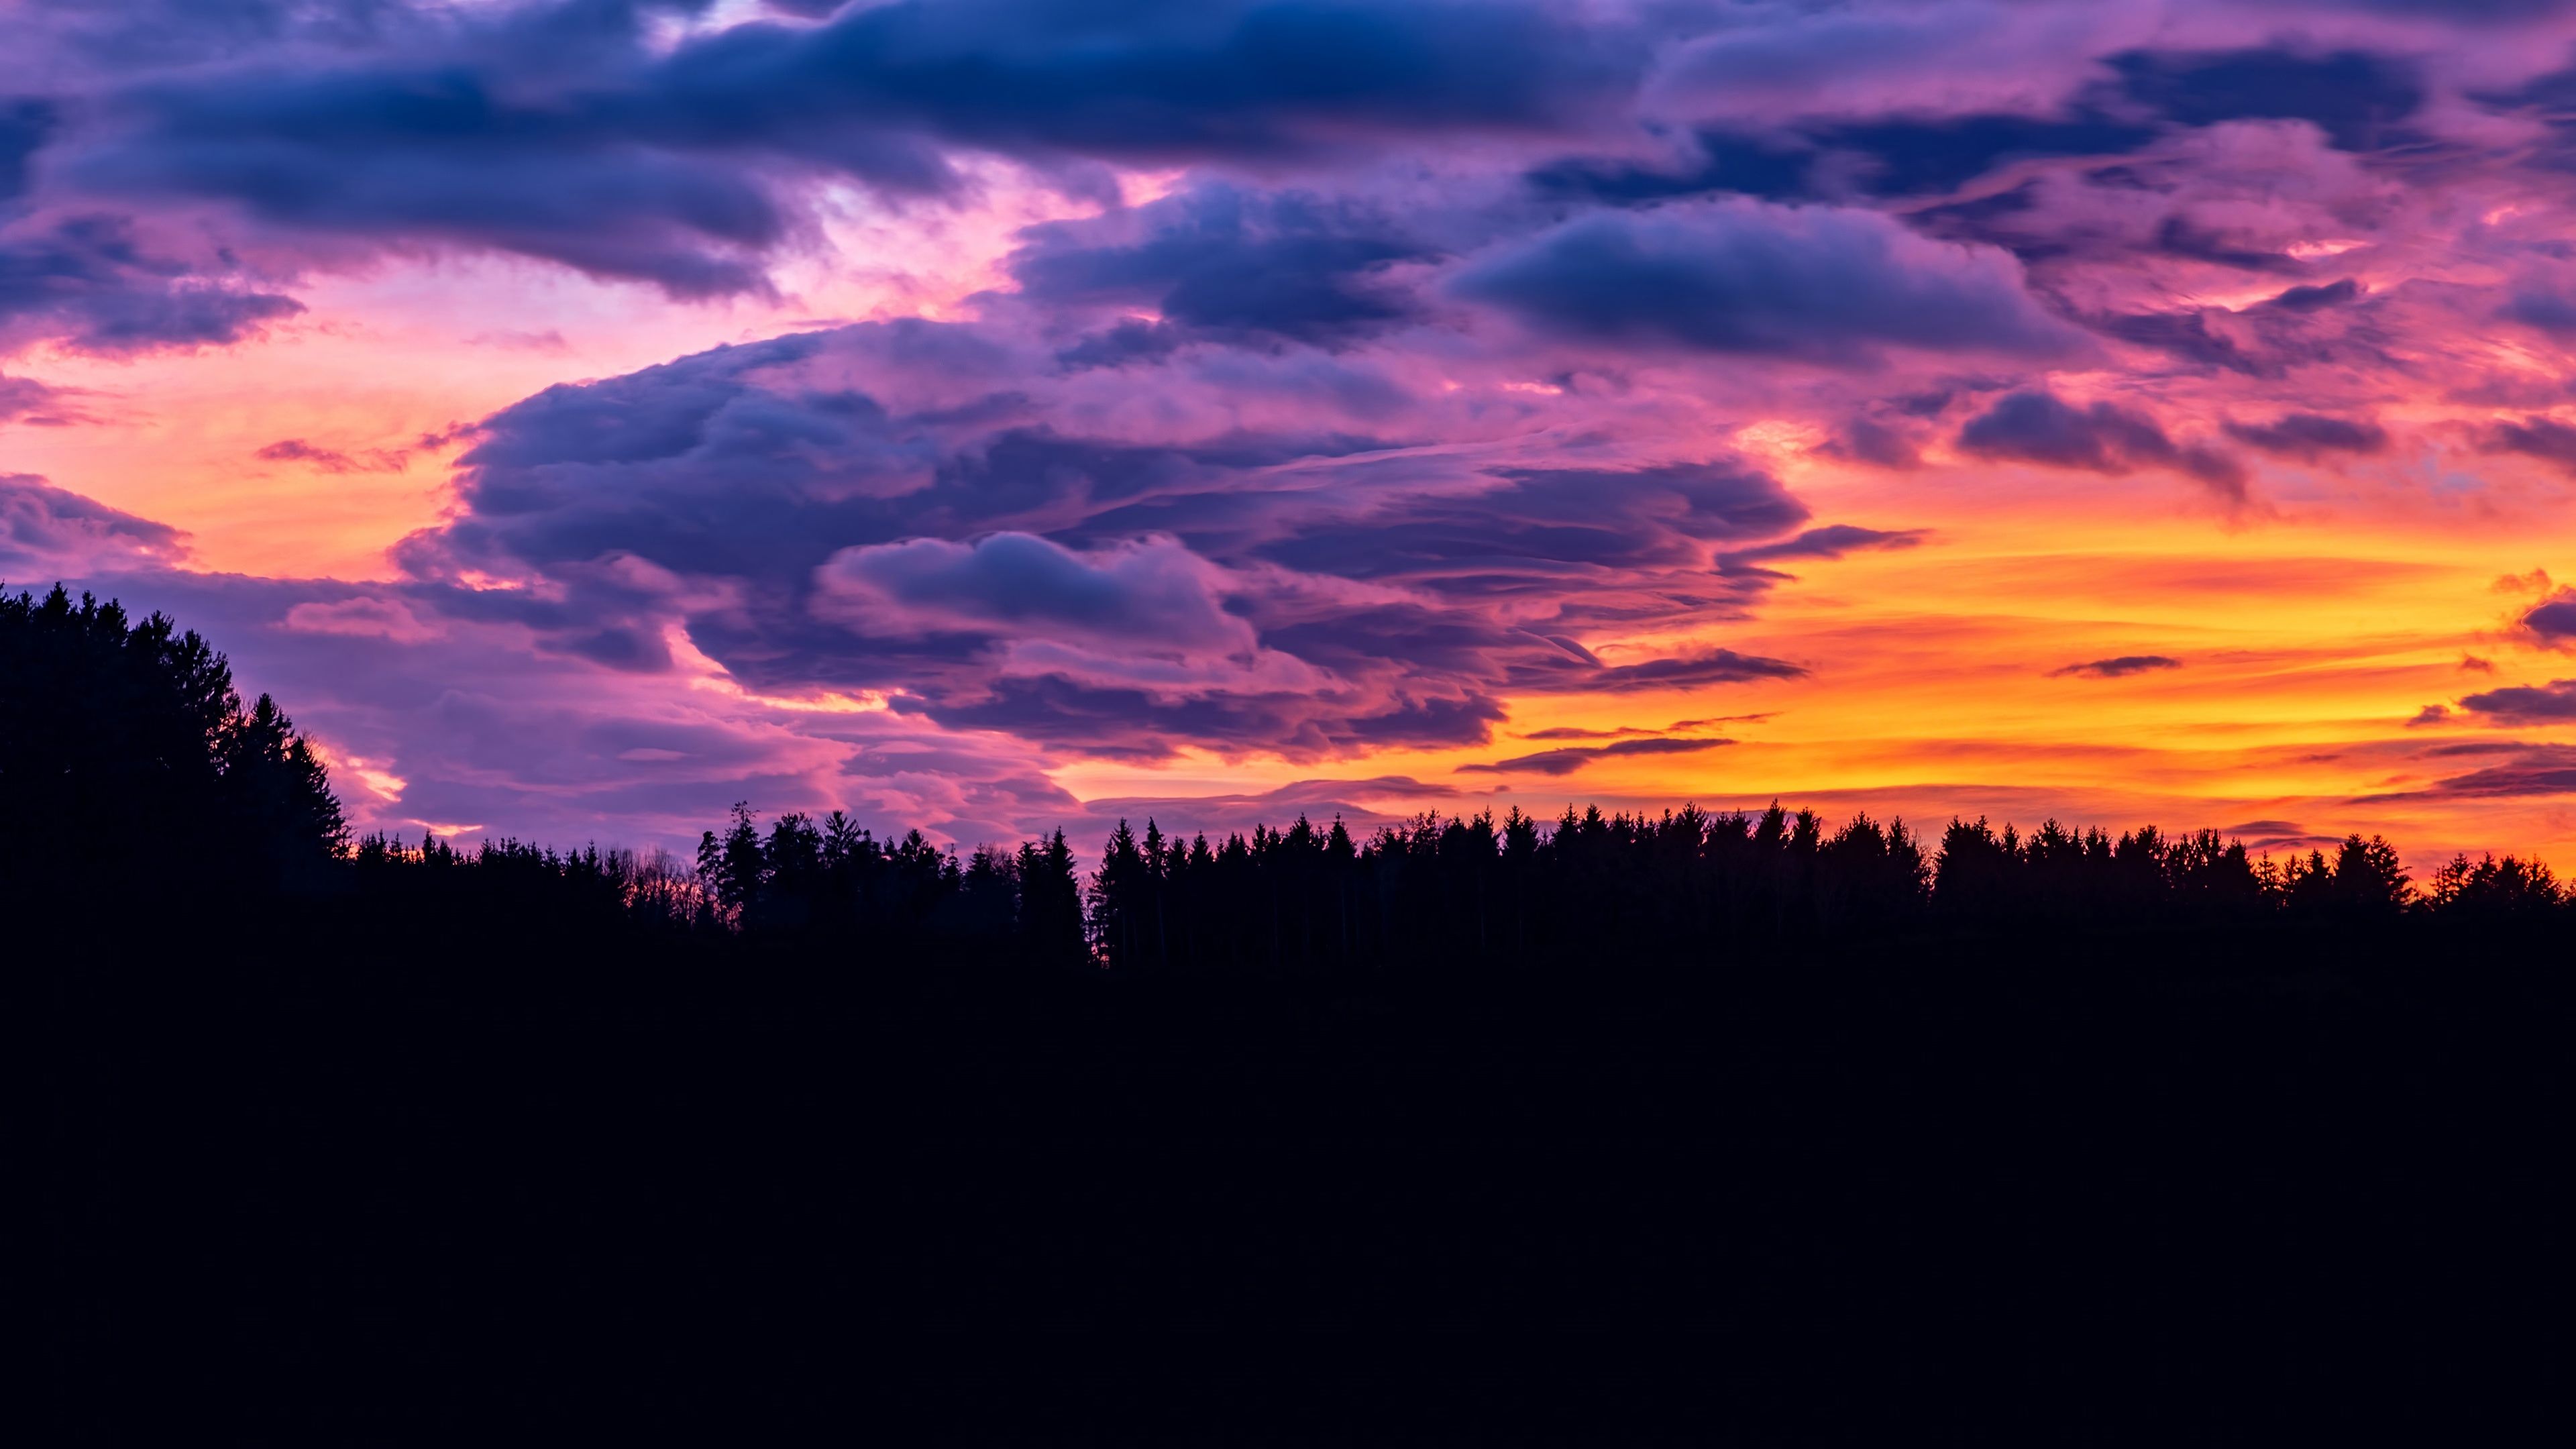 Purple Clouds at Sunset 4k Ultra HD Wallpaper. Background Image